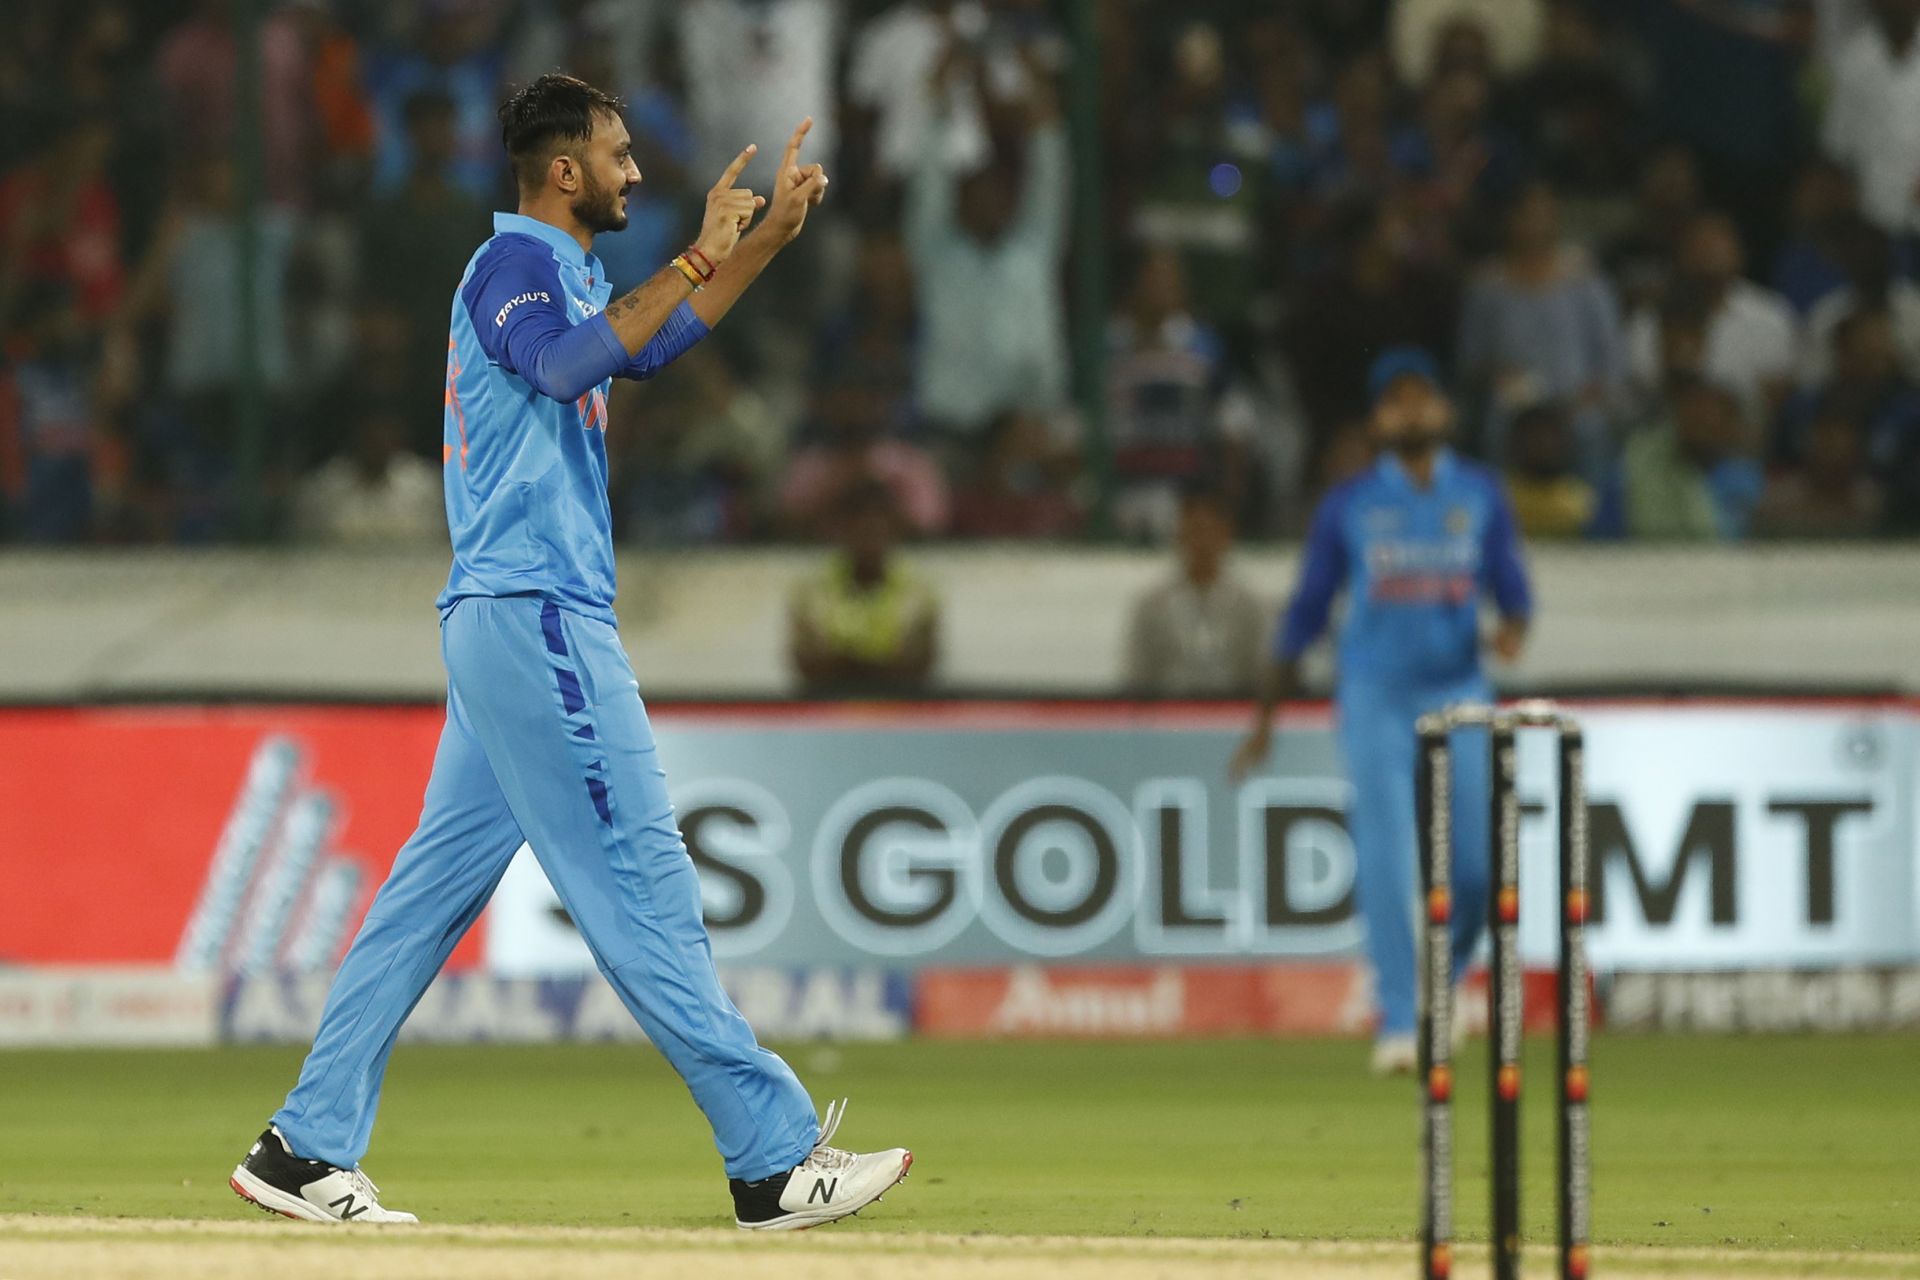 Axar Patel was included in the Indian squad as a like-for-like replacement for Ravindra Jadeja.